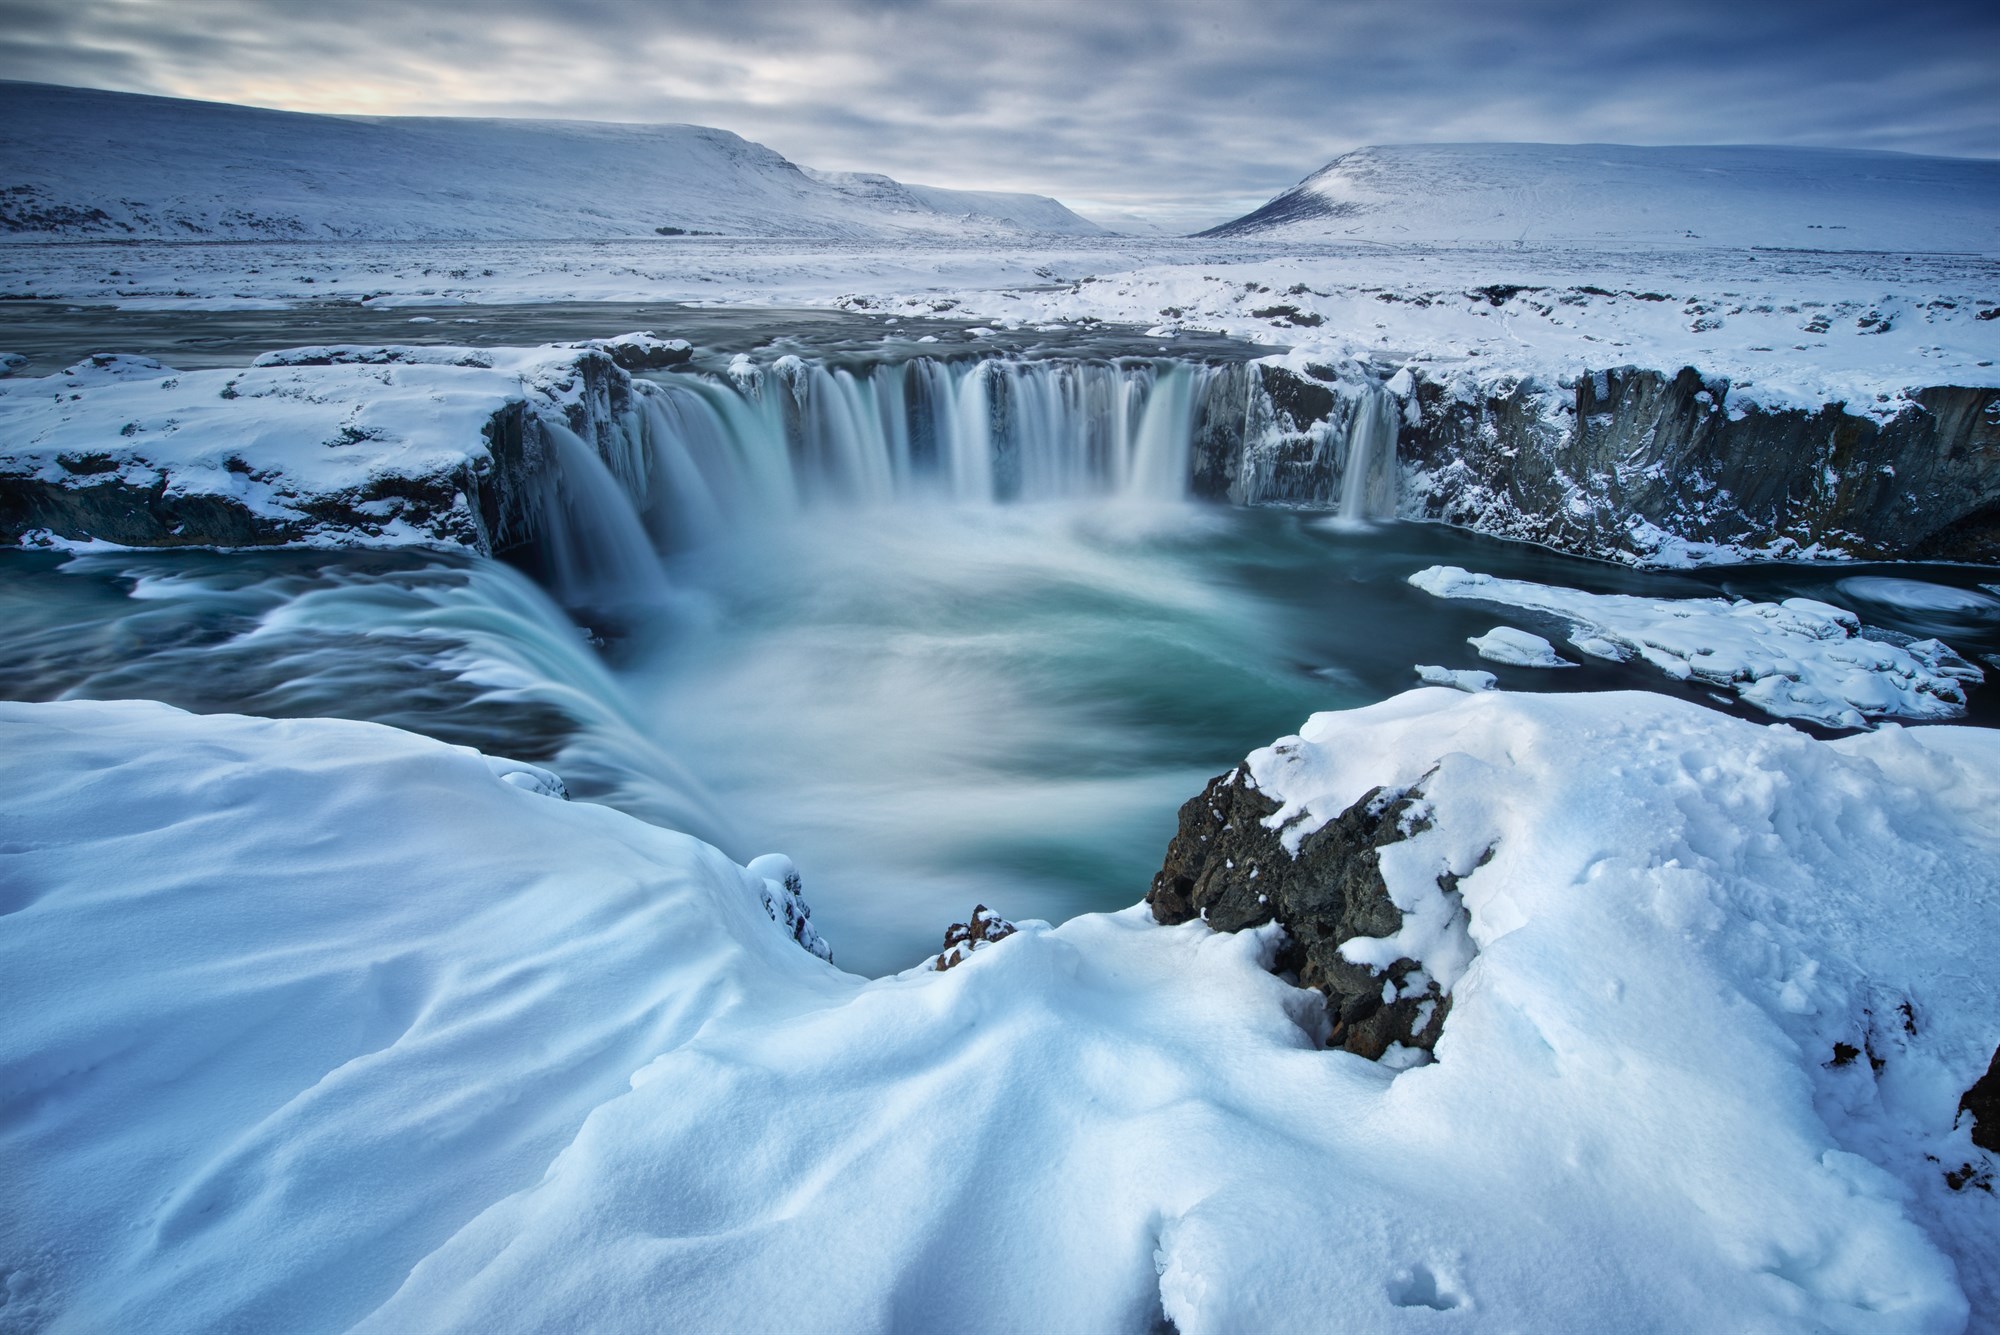 Godafoss waterfall in North Iceland